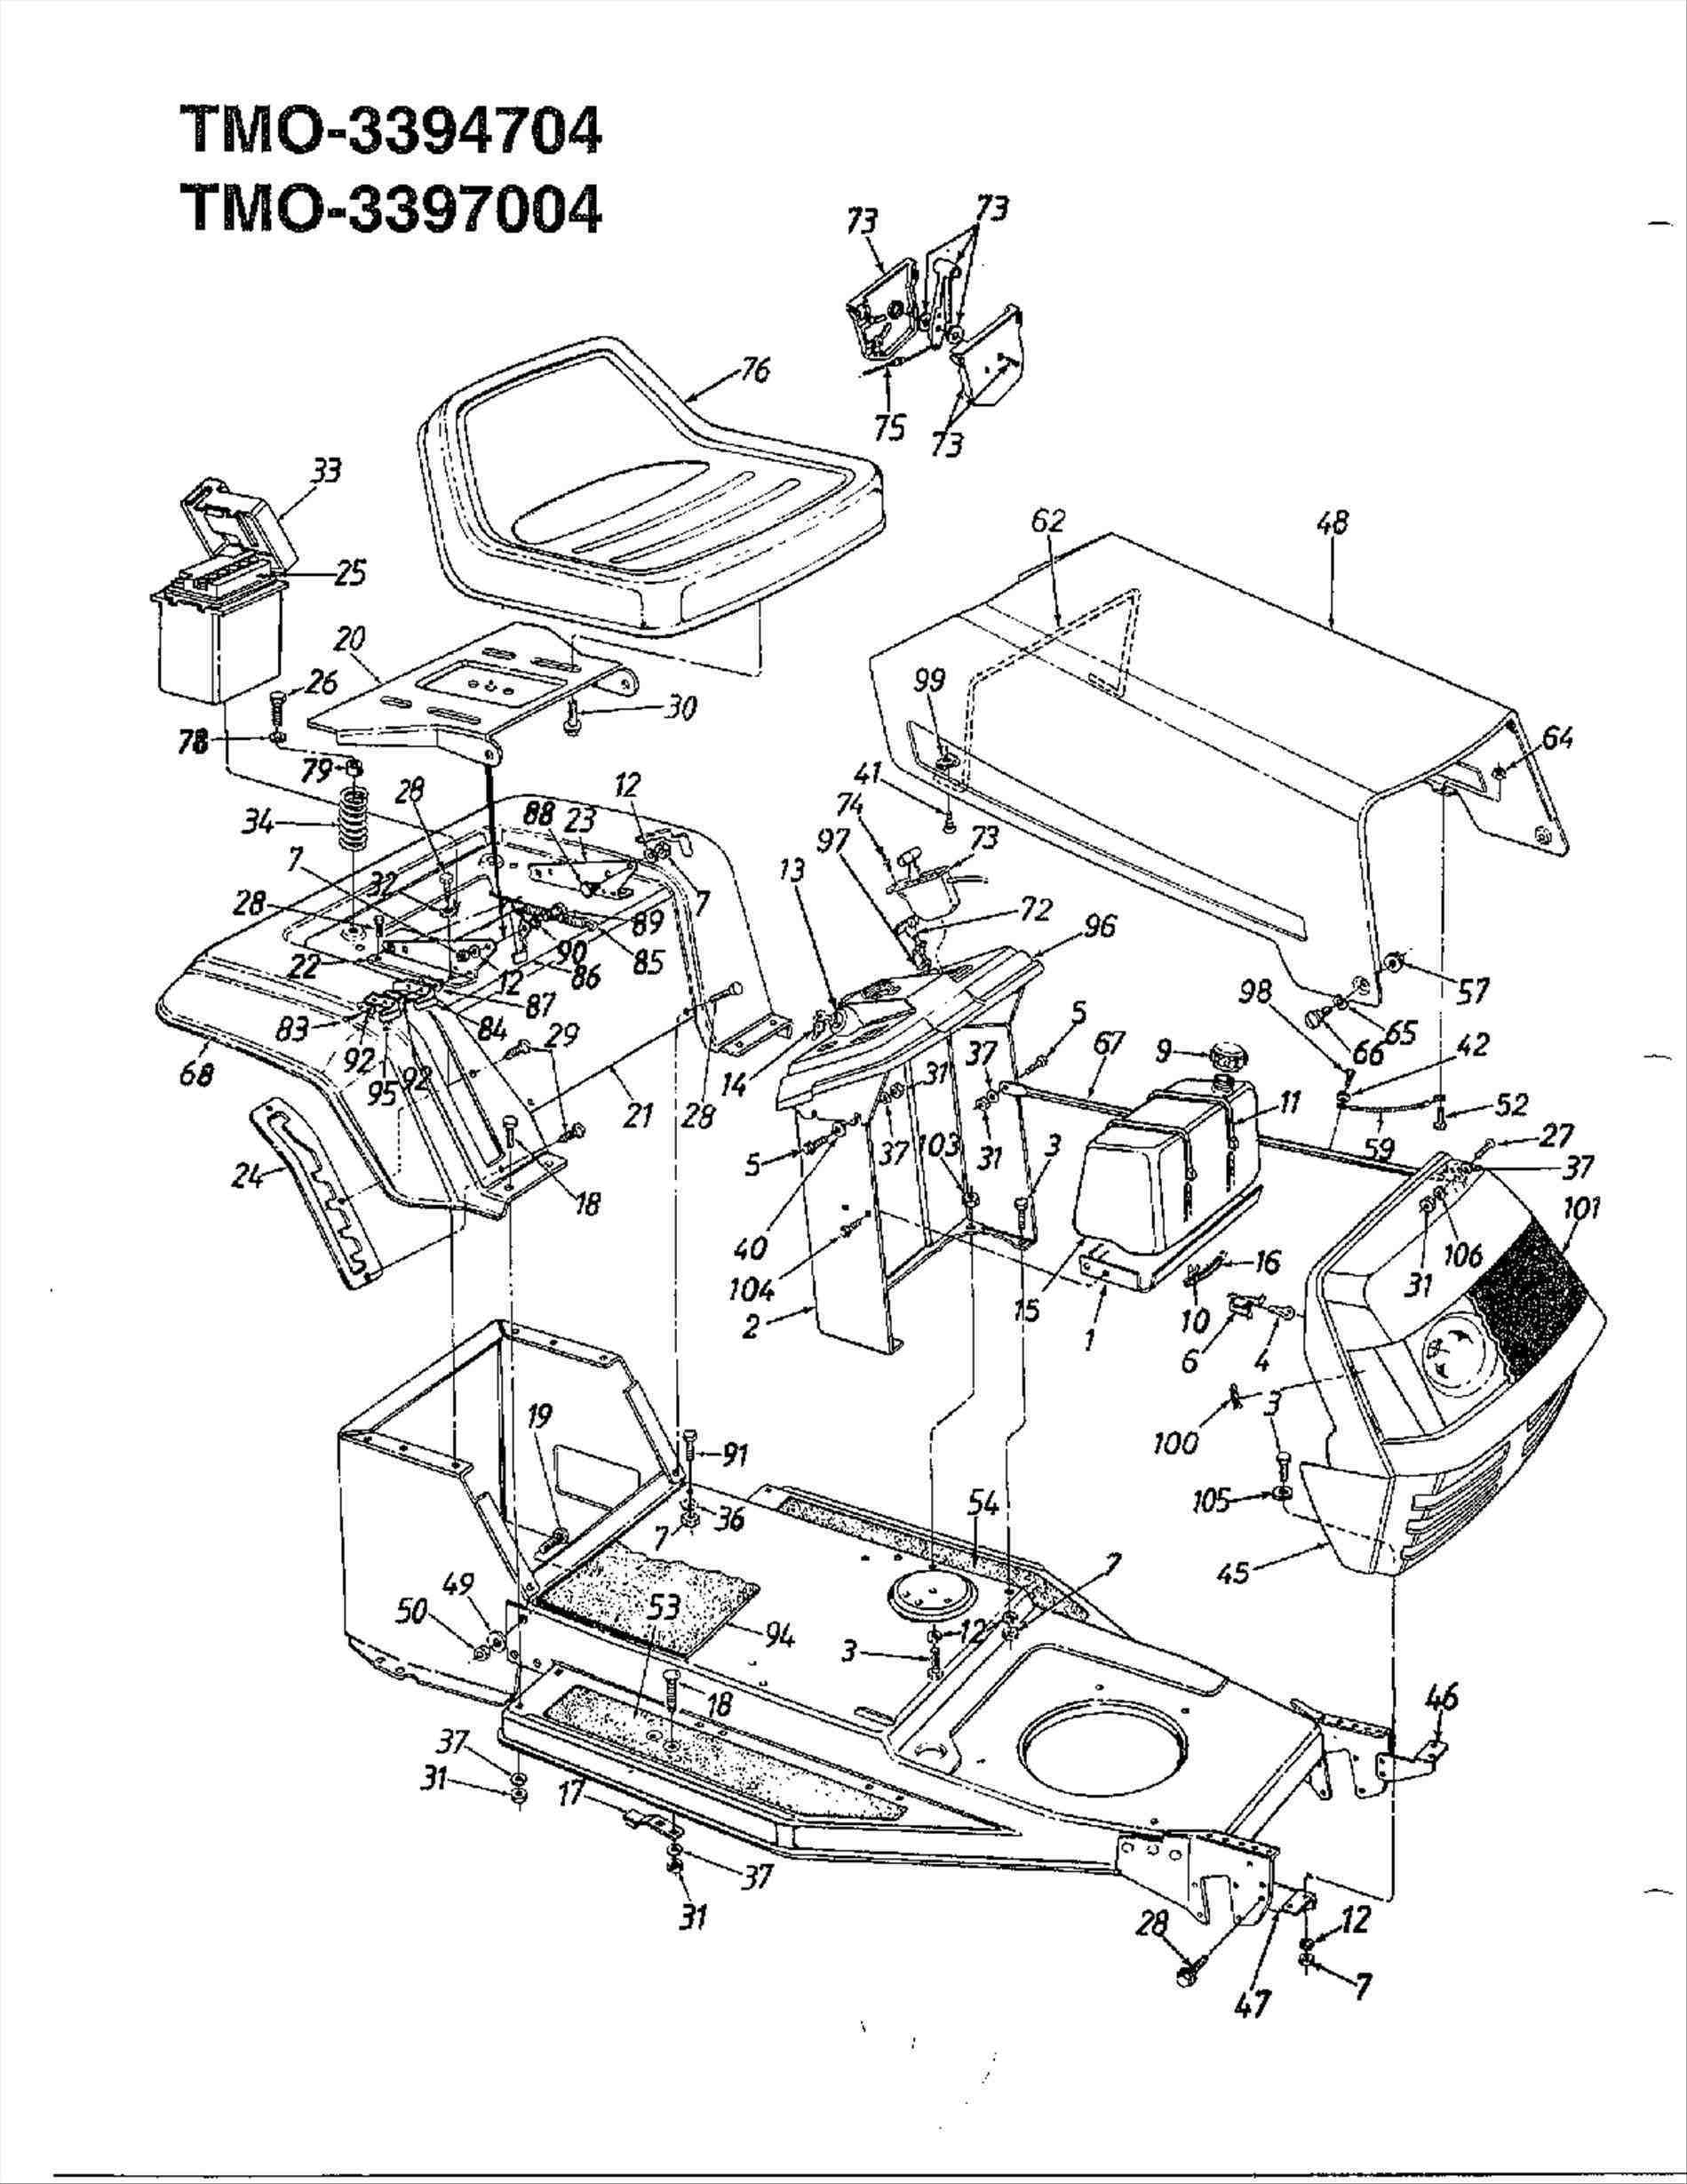 Craftsman Riding Lawn Mower Parts Diagram Diagram In Addition Snapper Drive Belt Diagram Besides Lawn Mower